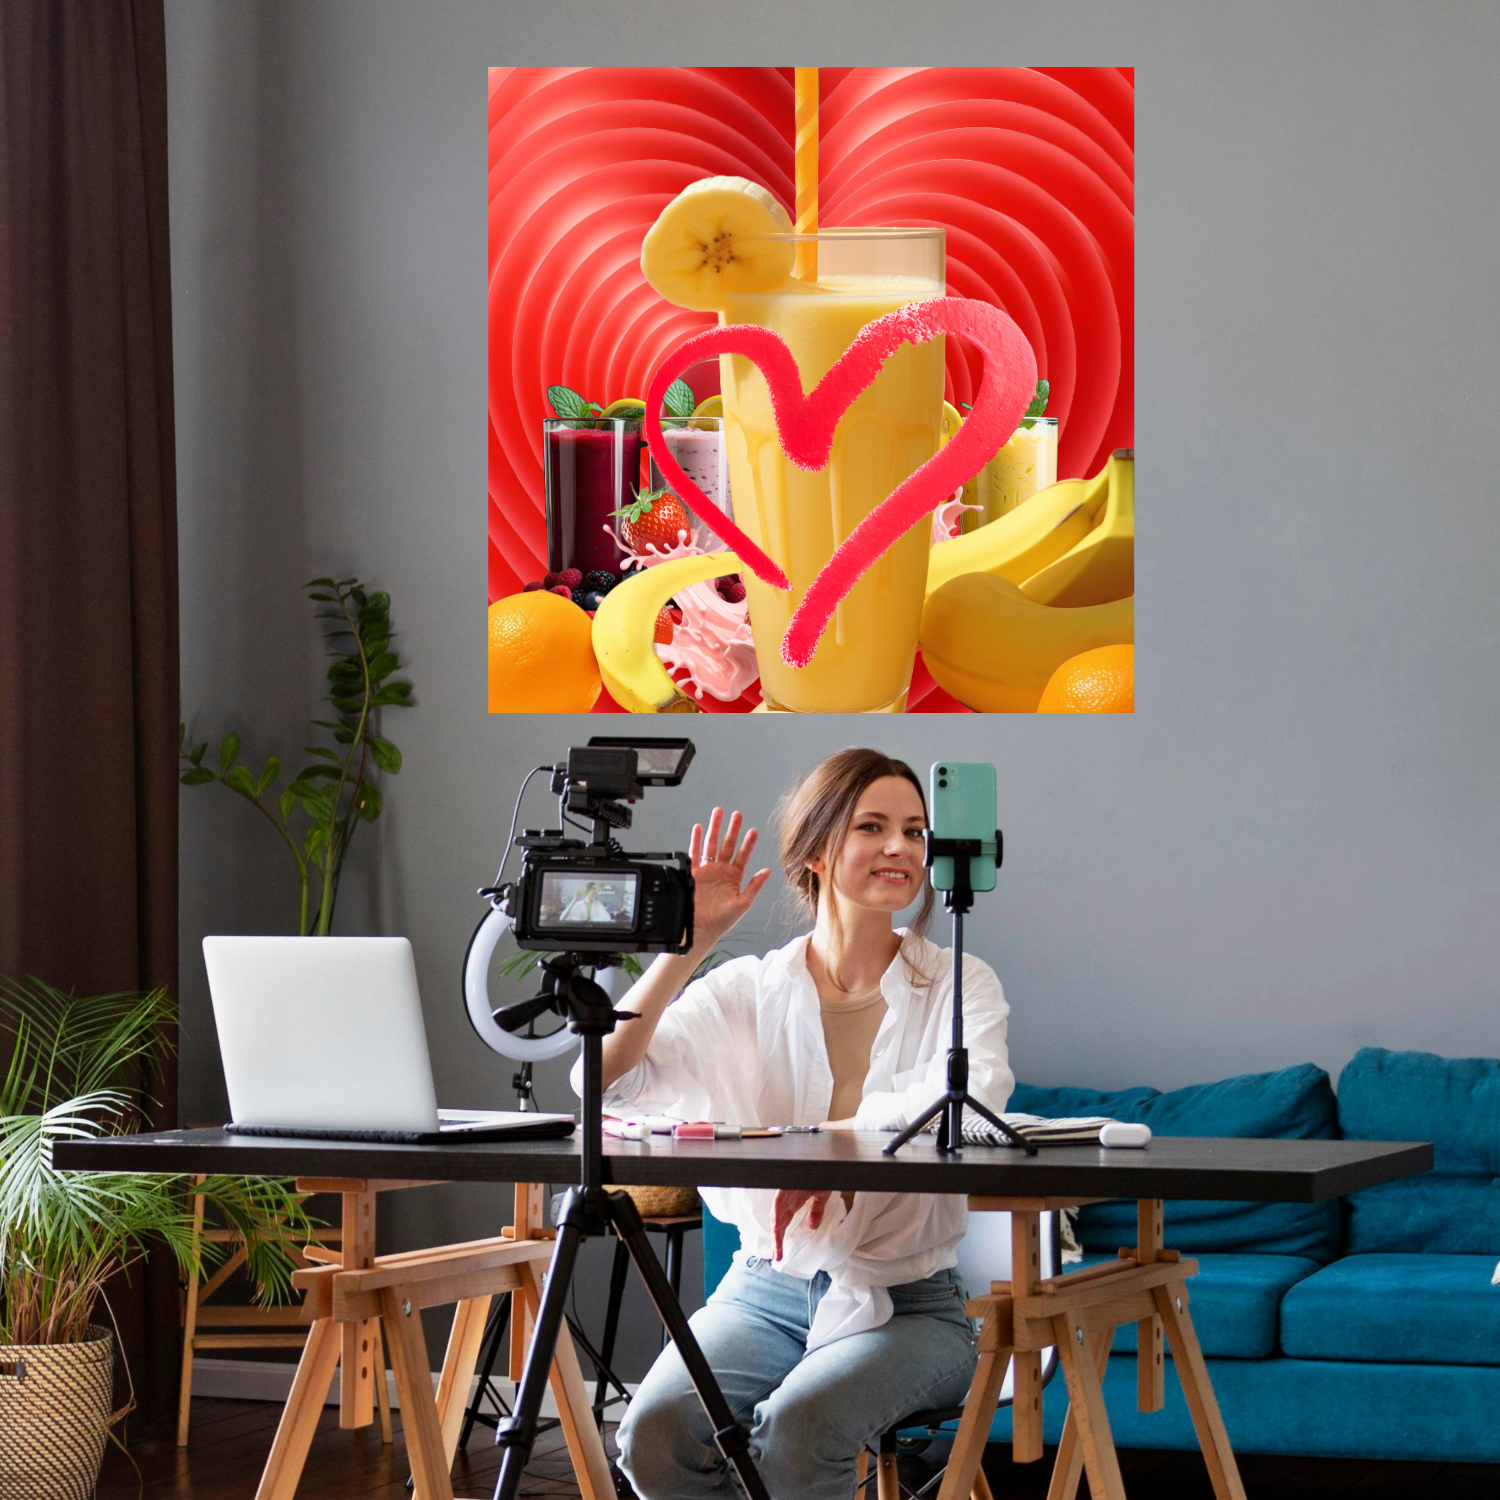 Wall Art LOVE SMOOTHIES Canvas Print Painting Original Giclee32X32  GW Love Nice Beauty Fun Design Fit Hot House Home Office Gift Ready Hang Living